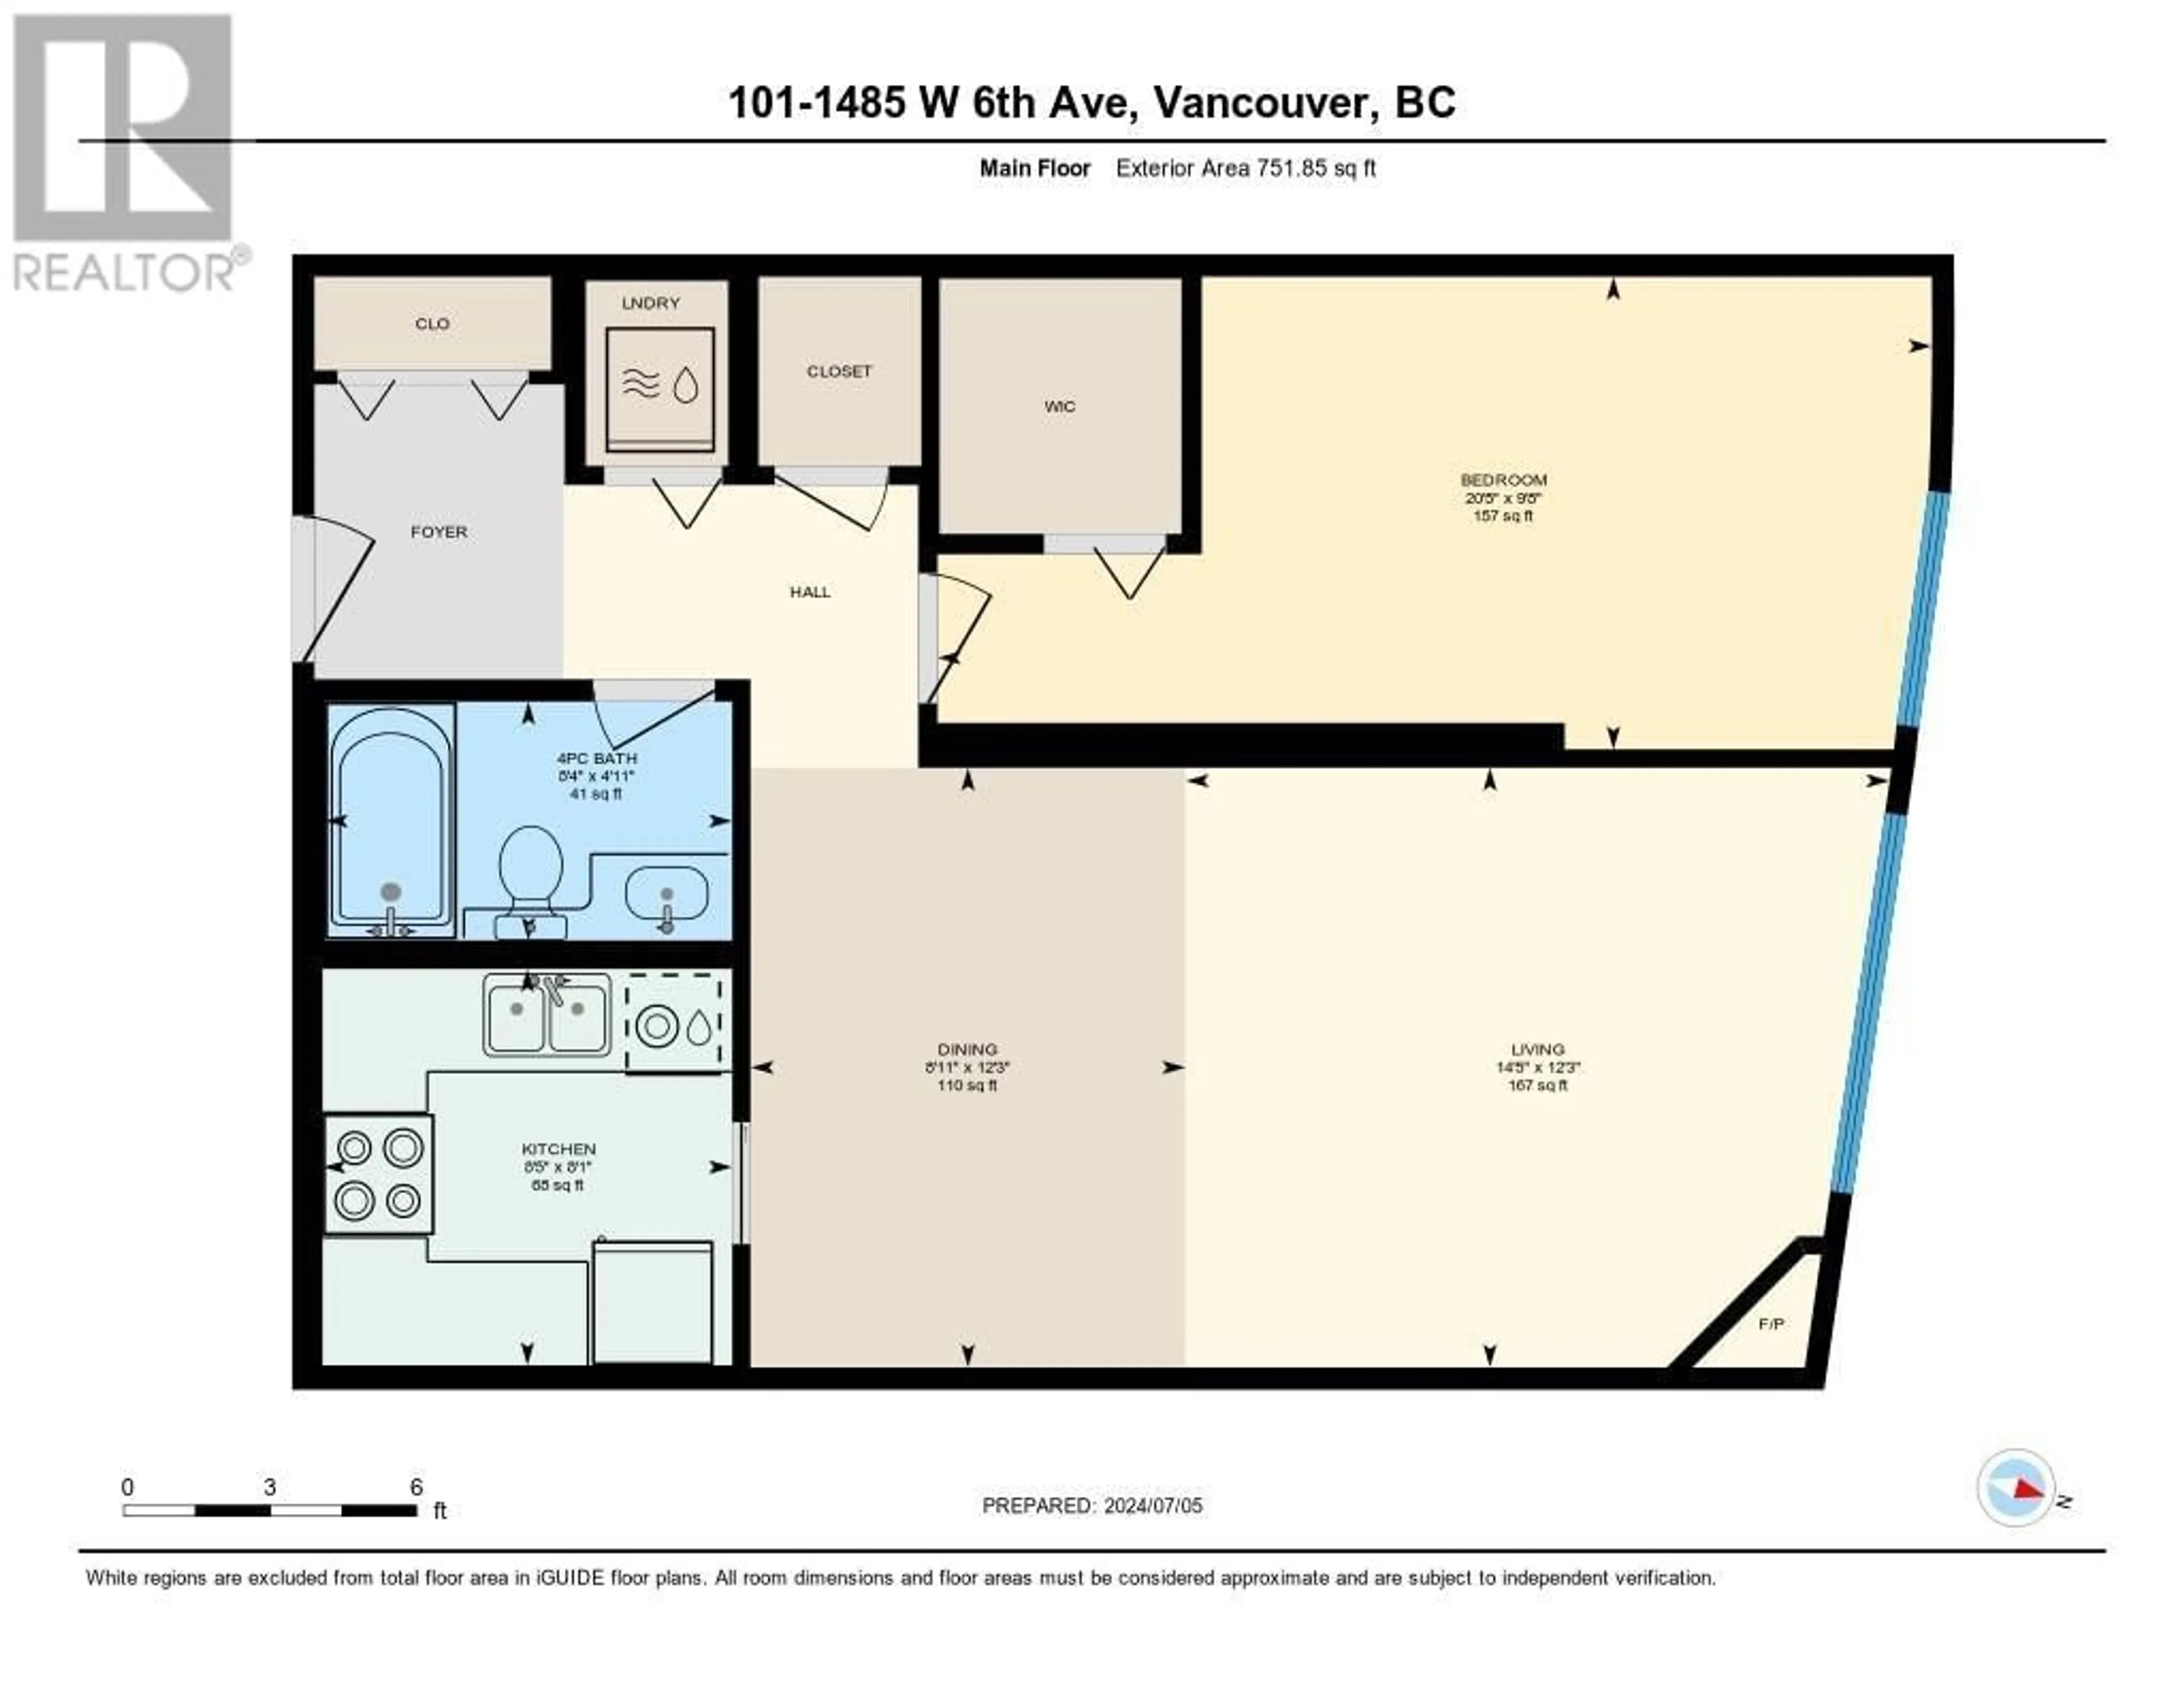 Floor plan for 101 1485 W 6TH AVENUE, Vancouver British Columbia V6H4G1